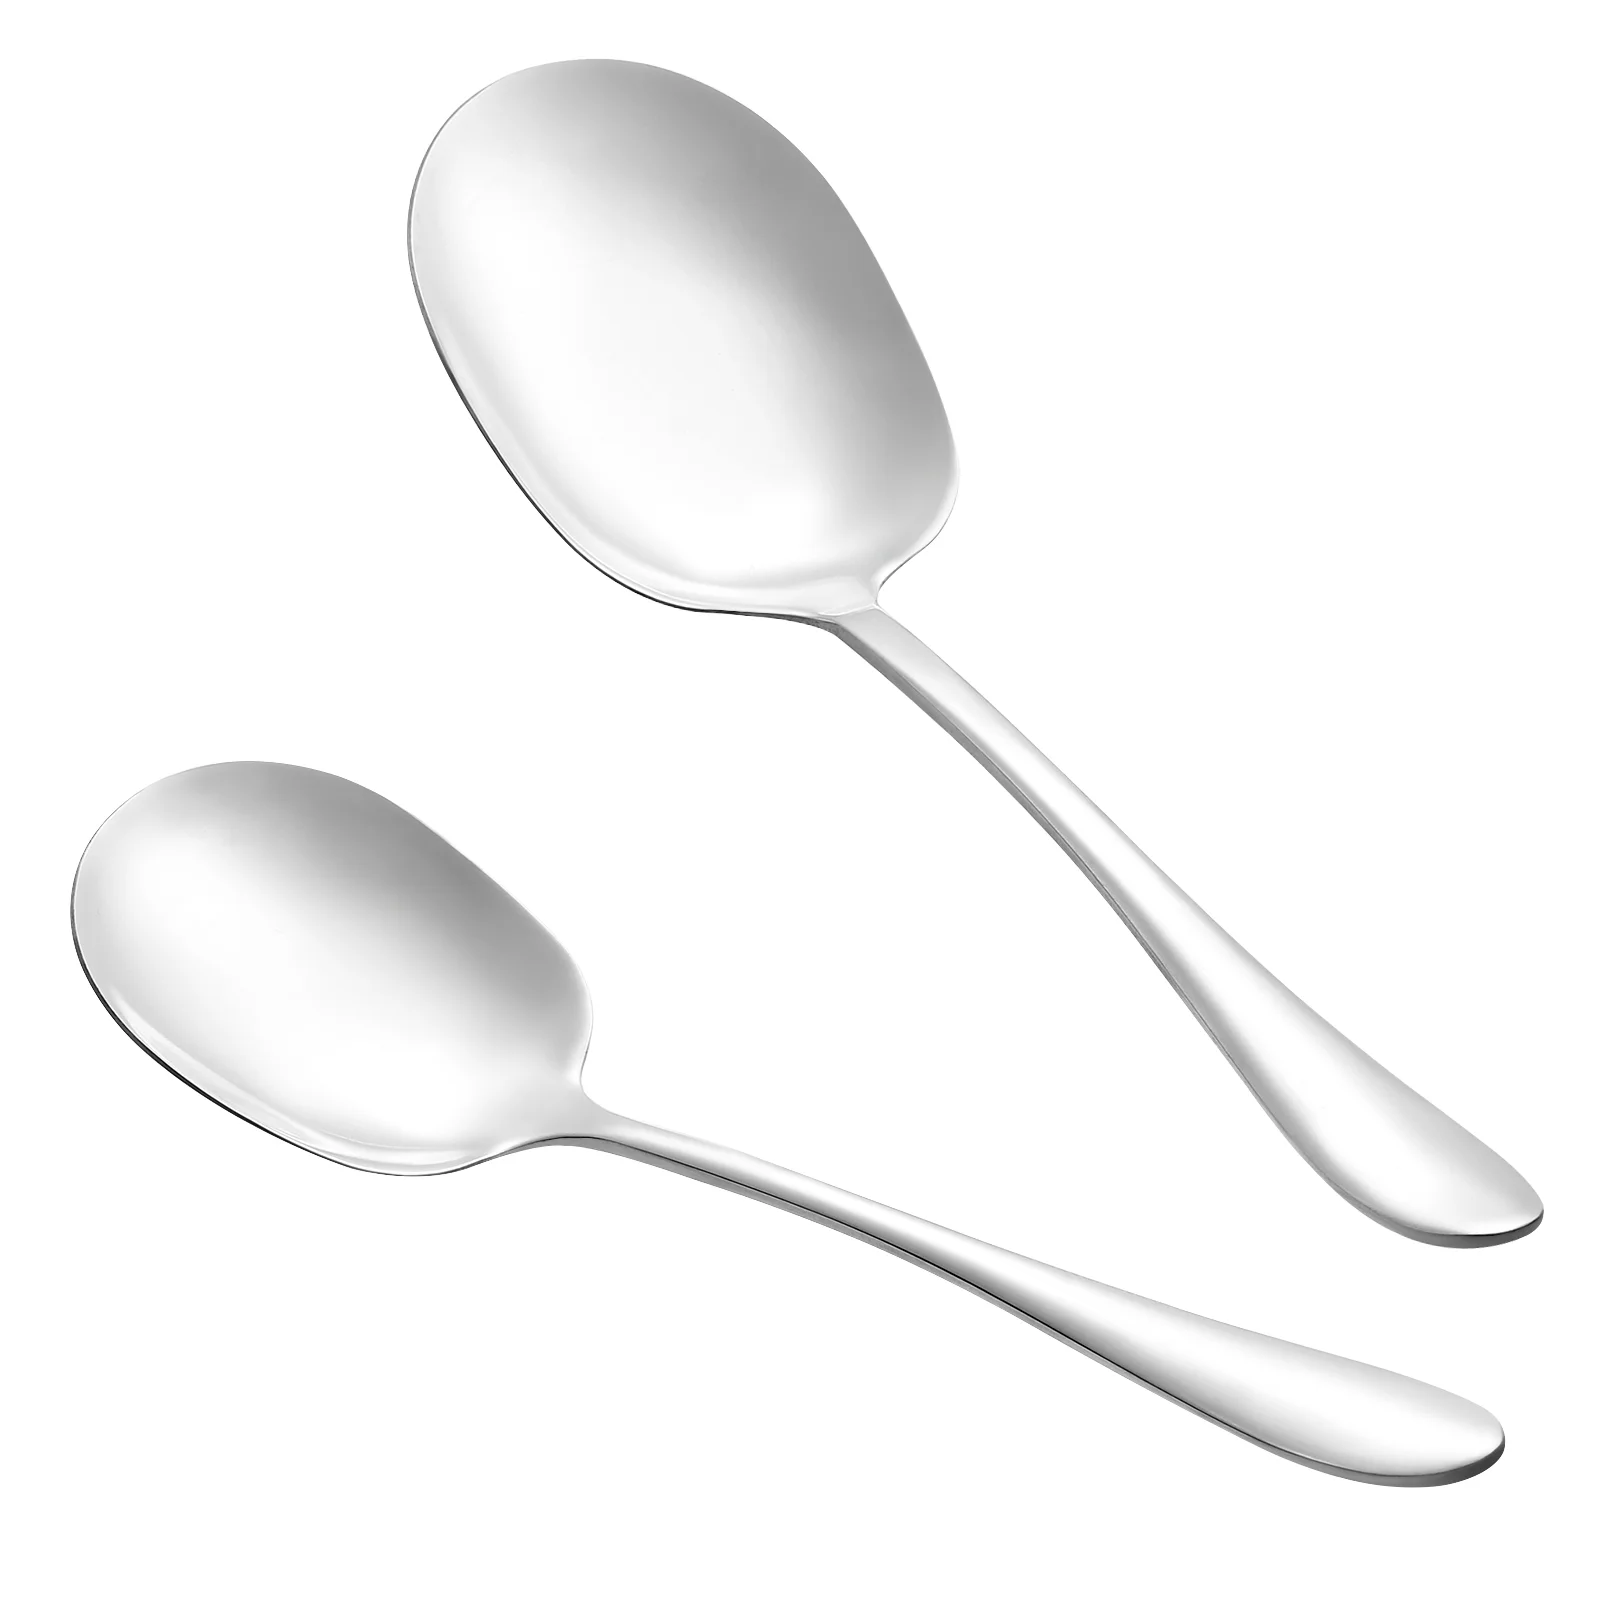 

2pcs Buffet Serving Spoons Pasta Spoon Stainless Steel Cooking Spoon Big Ladle Tablespoons Kitchen Scoops Dinner Spoon